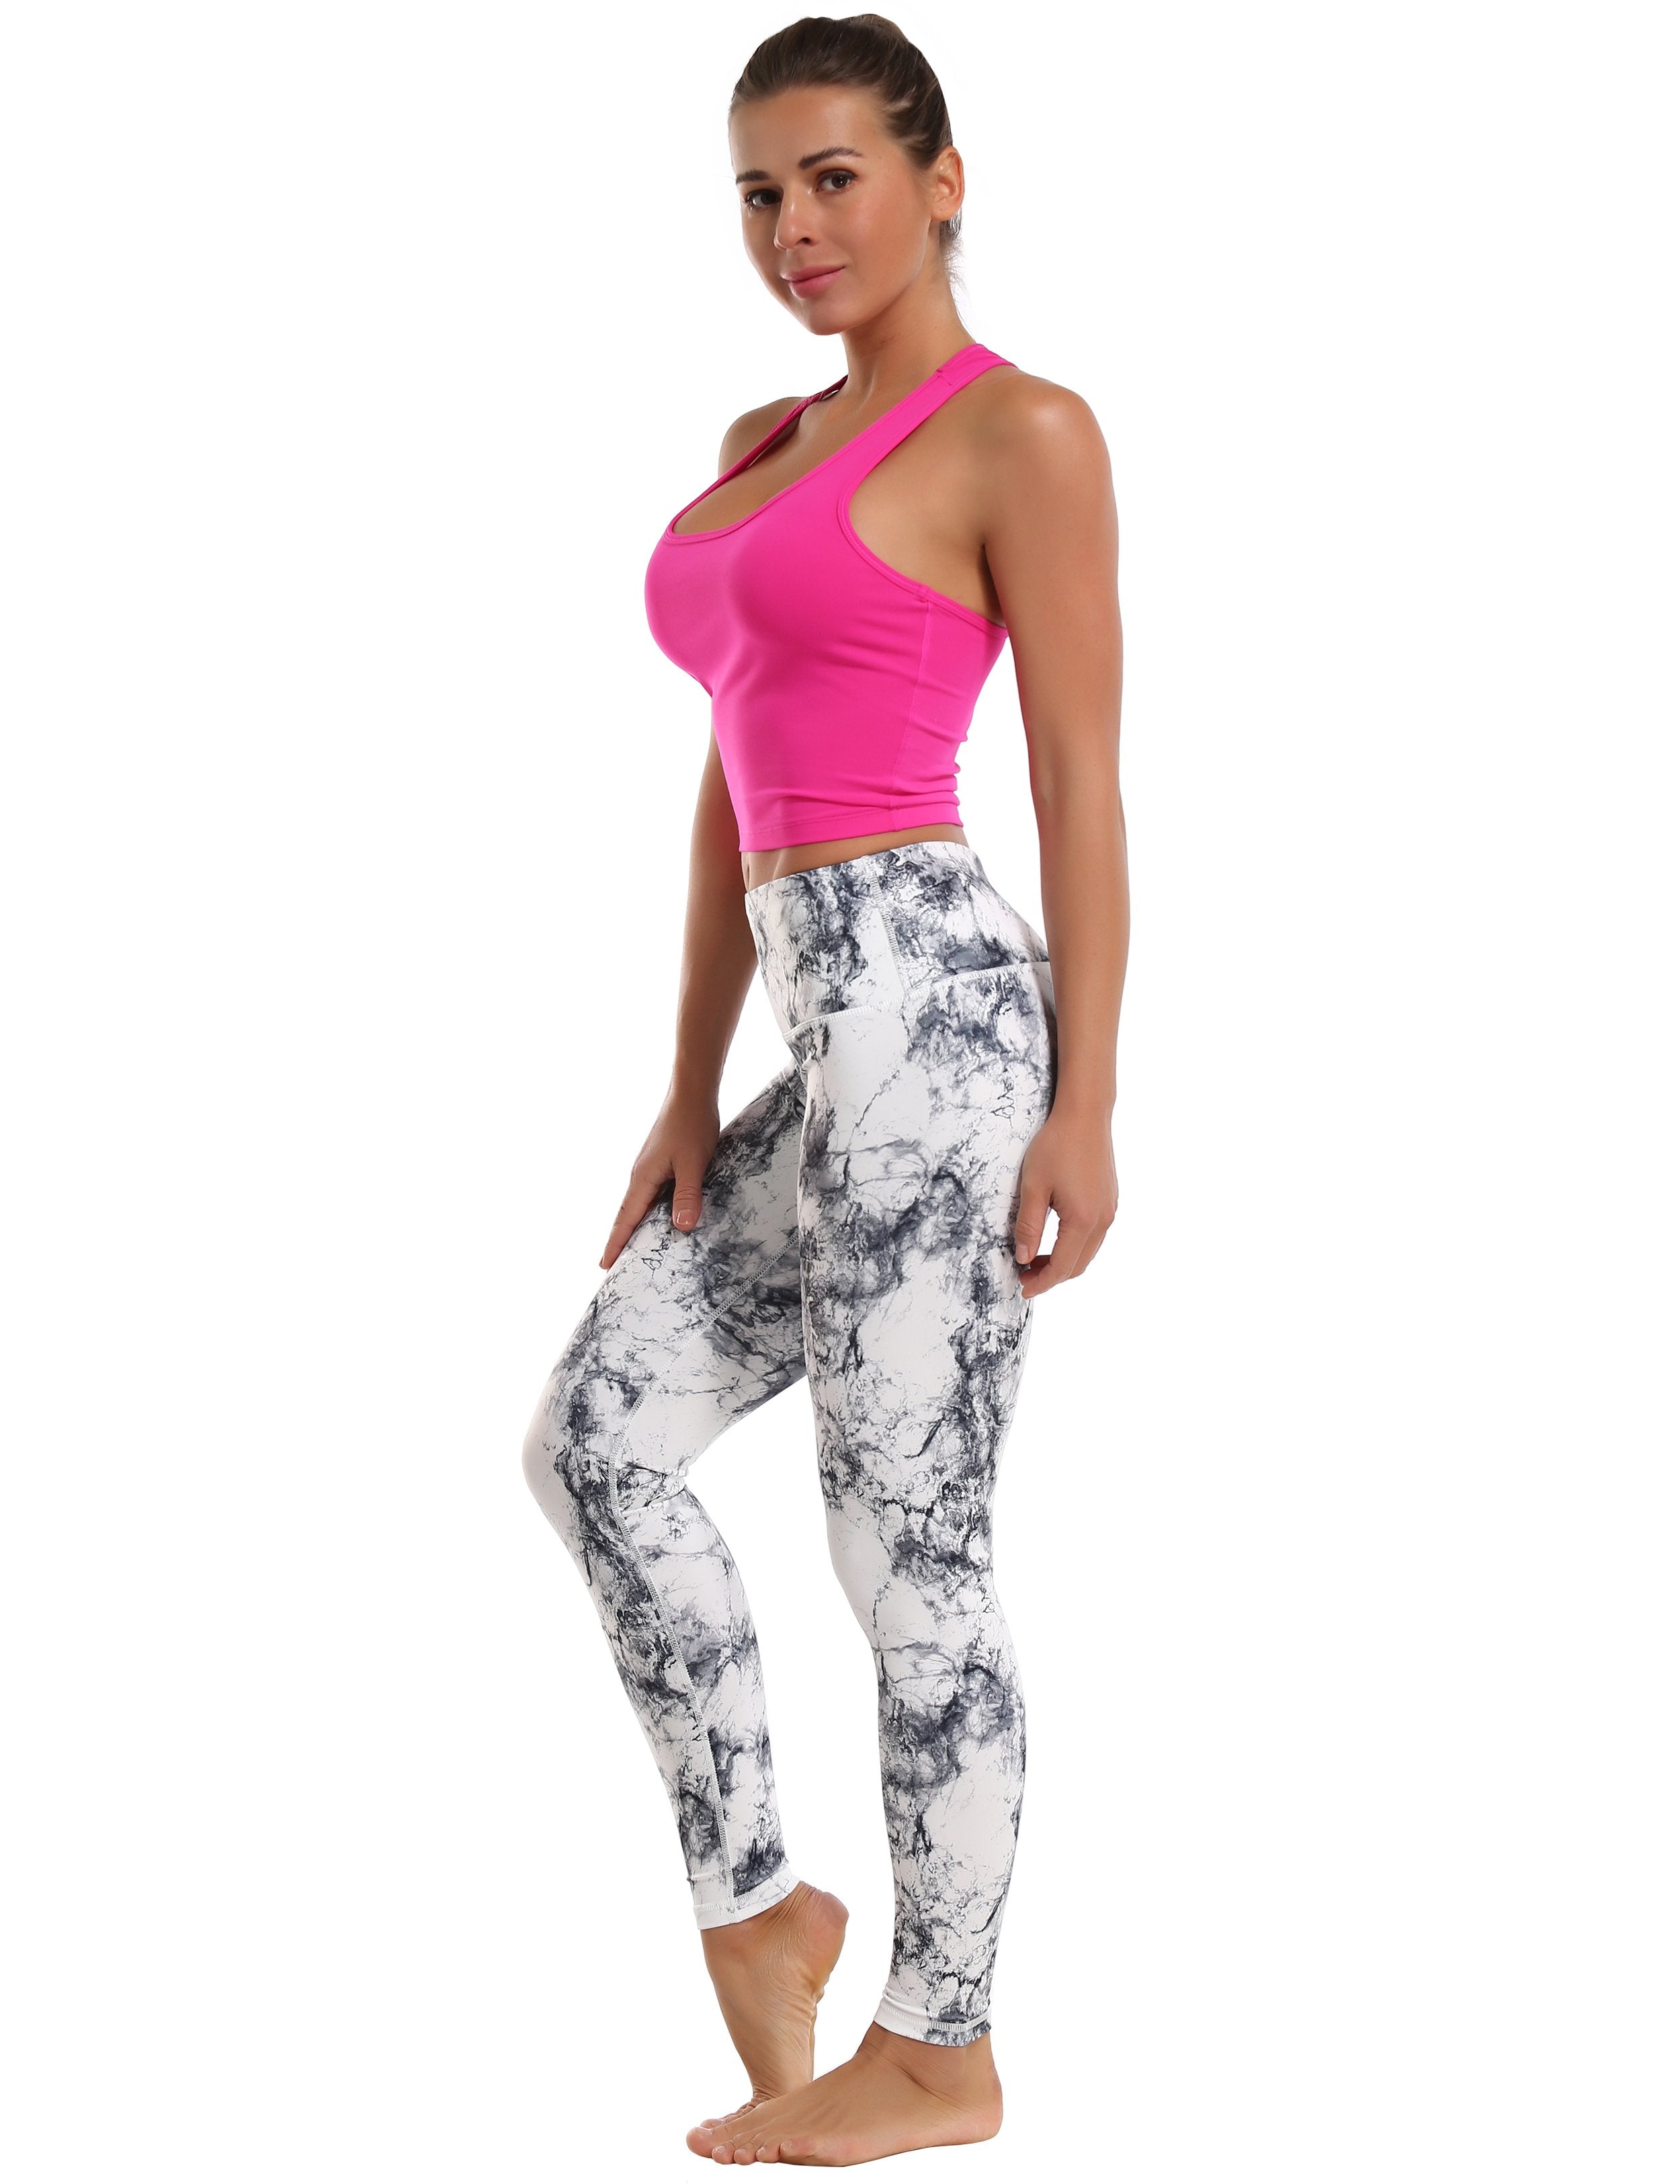 High Waist Golf Pants arabescato 82%Polyester/18%Spandex Fabric doesn't attract lint easily 4-way stretch No see-through Moisture-wicking Tummy control Inner pocket